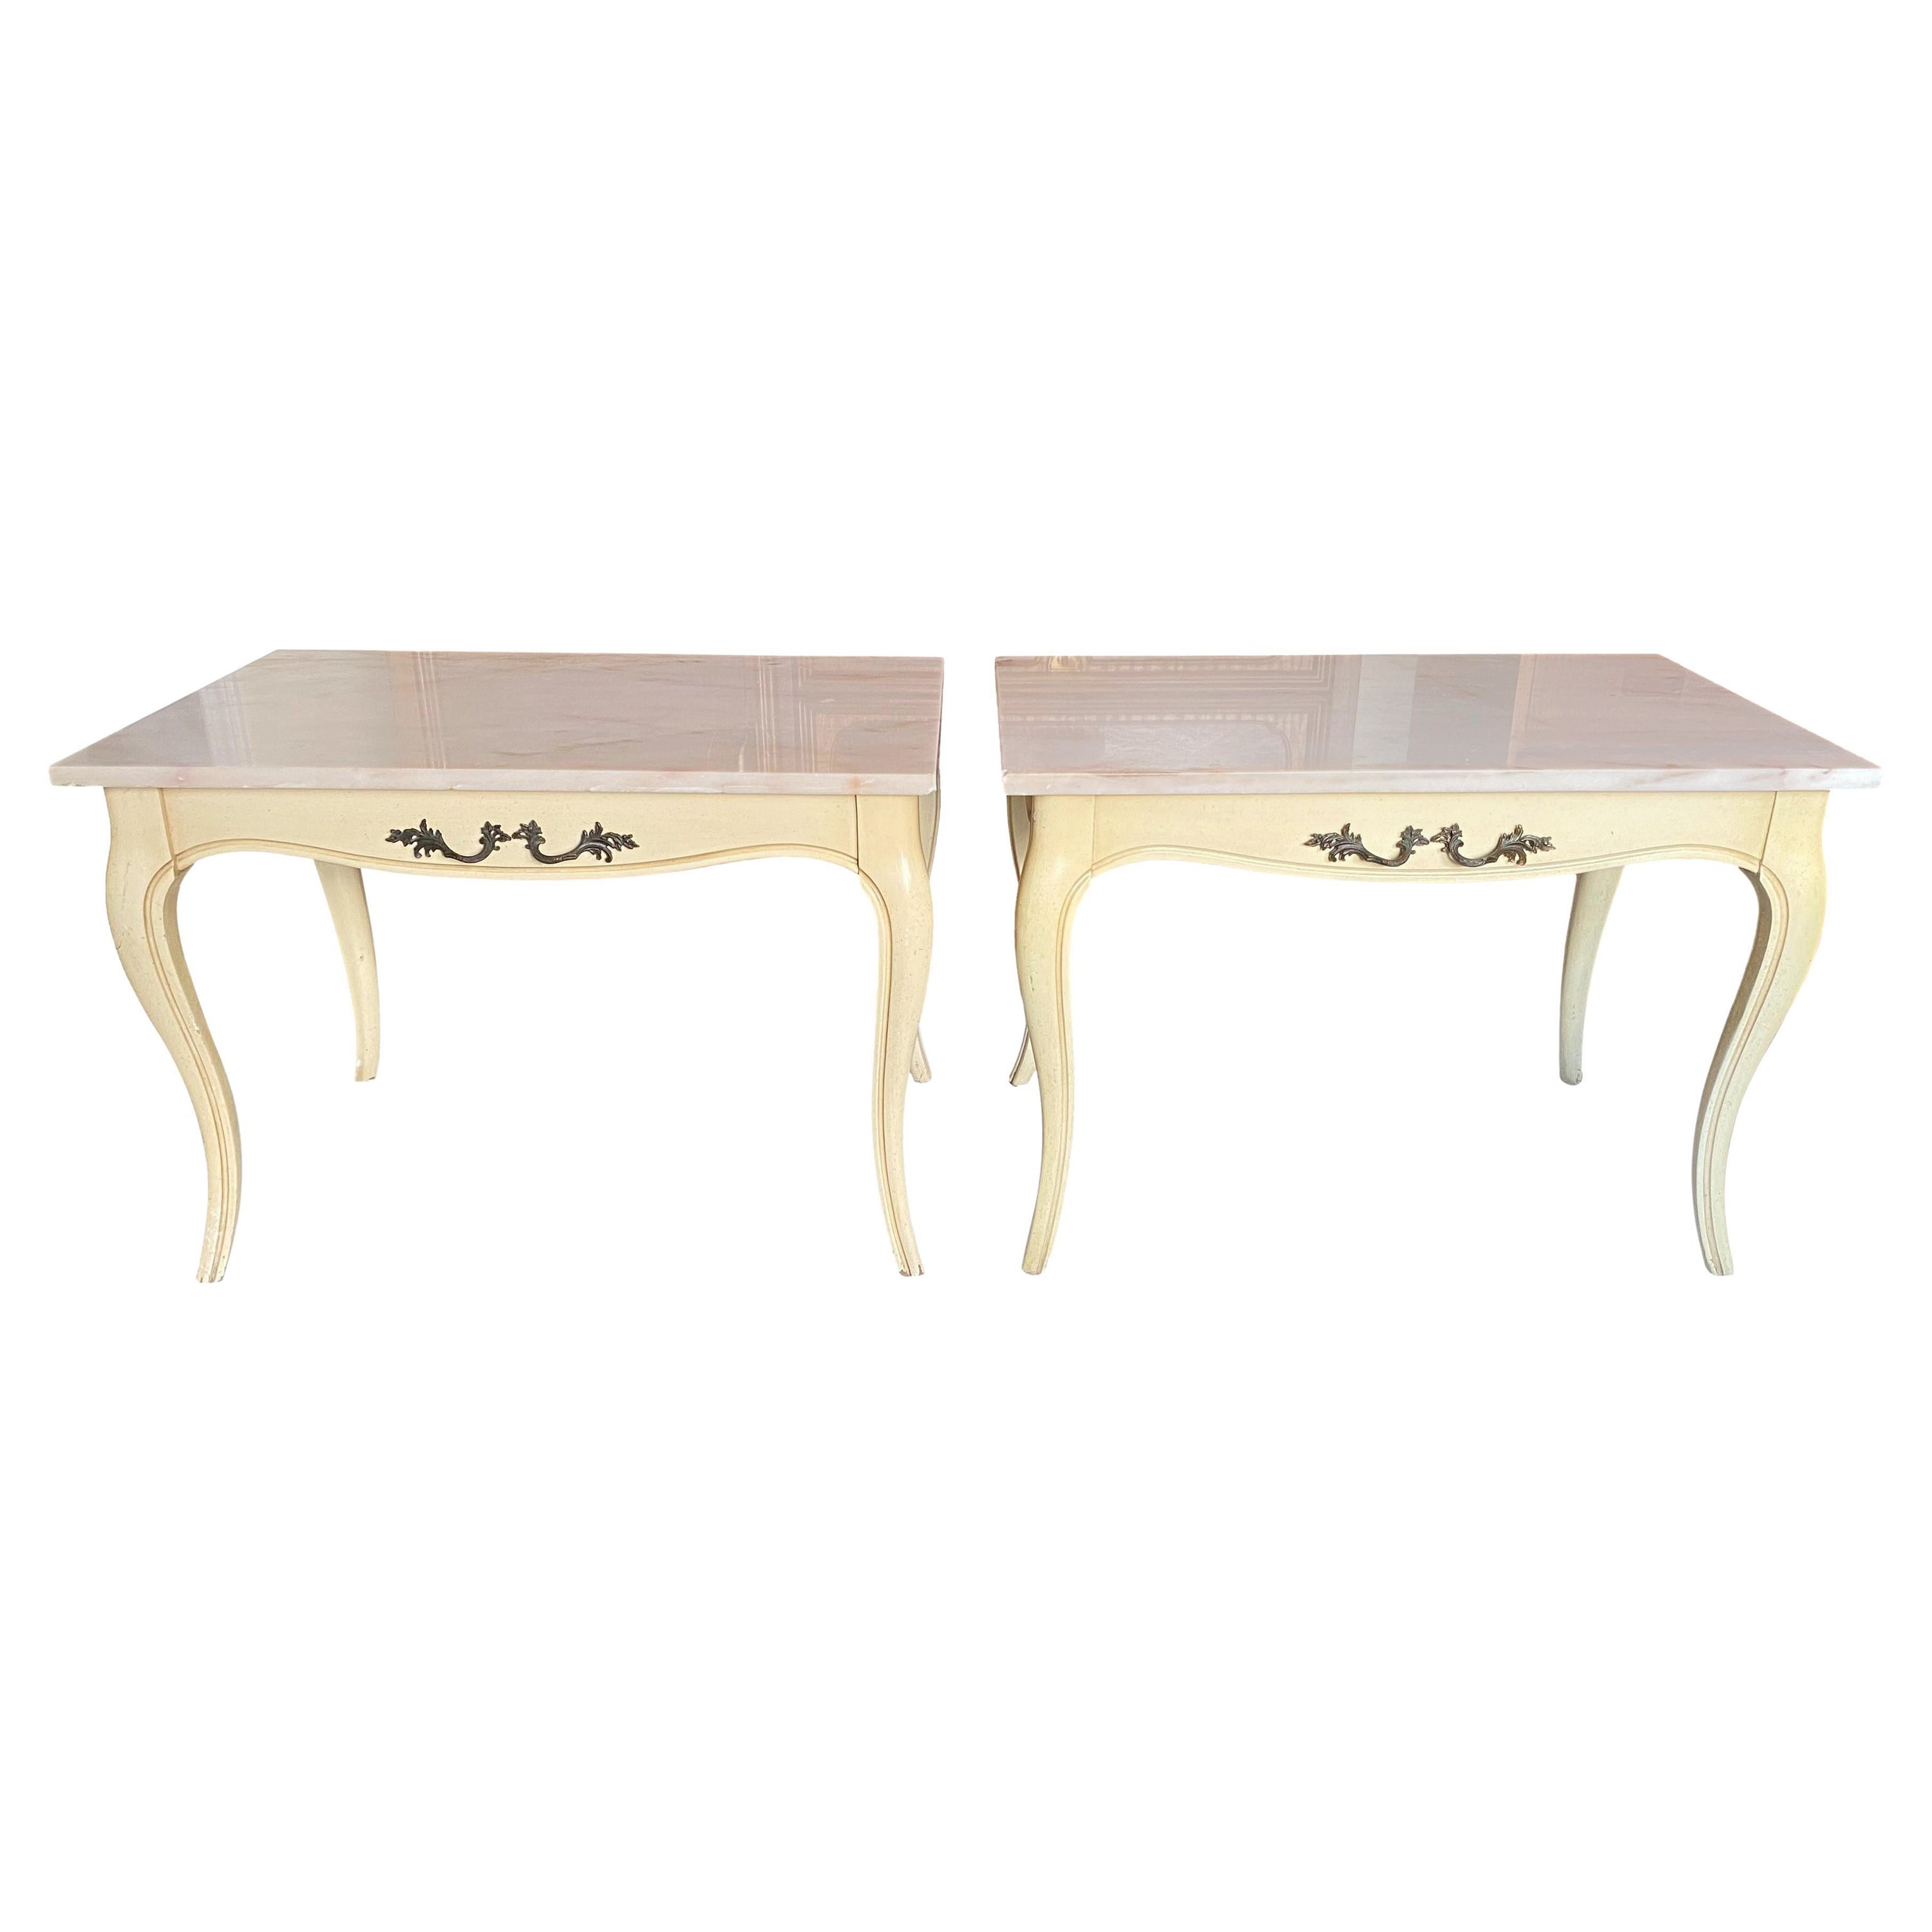 Vintage French Louis XV Marble Top Cream End Tables, a Pair